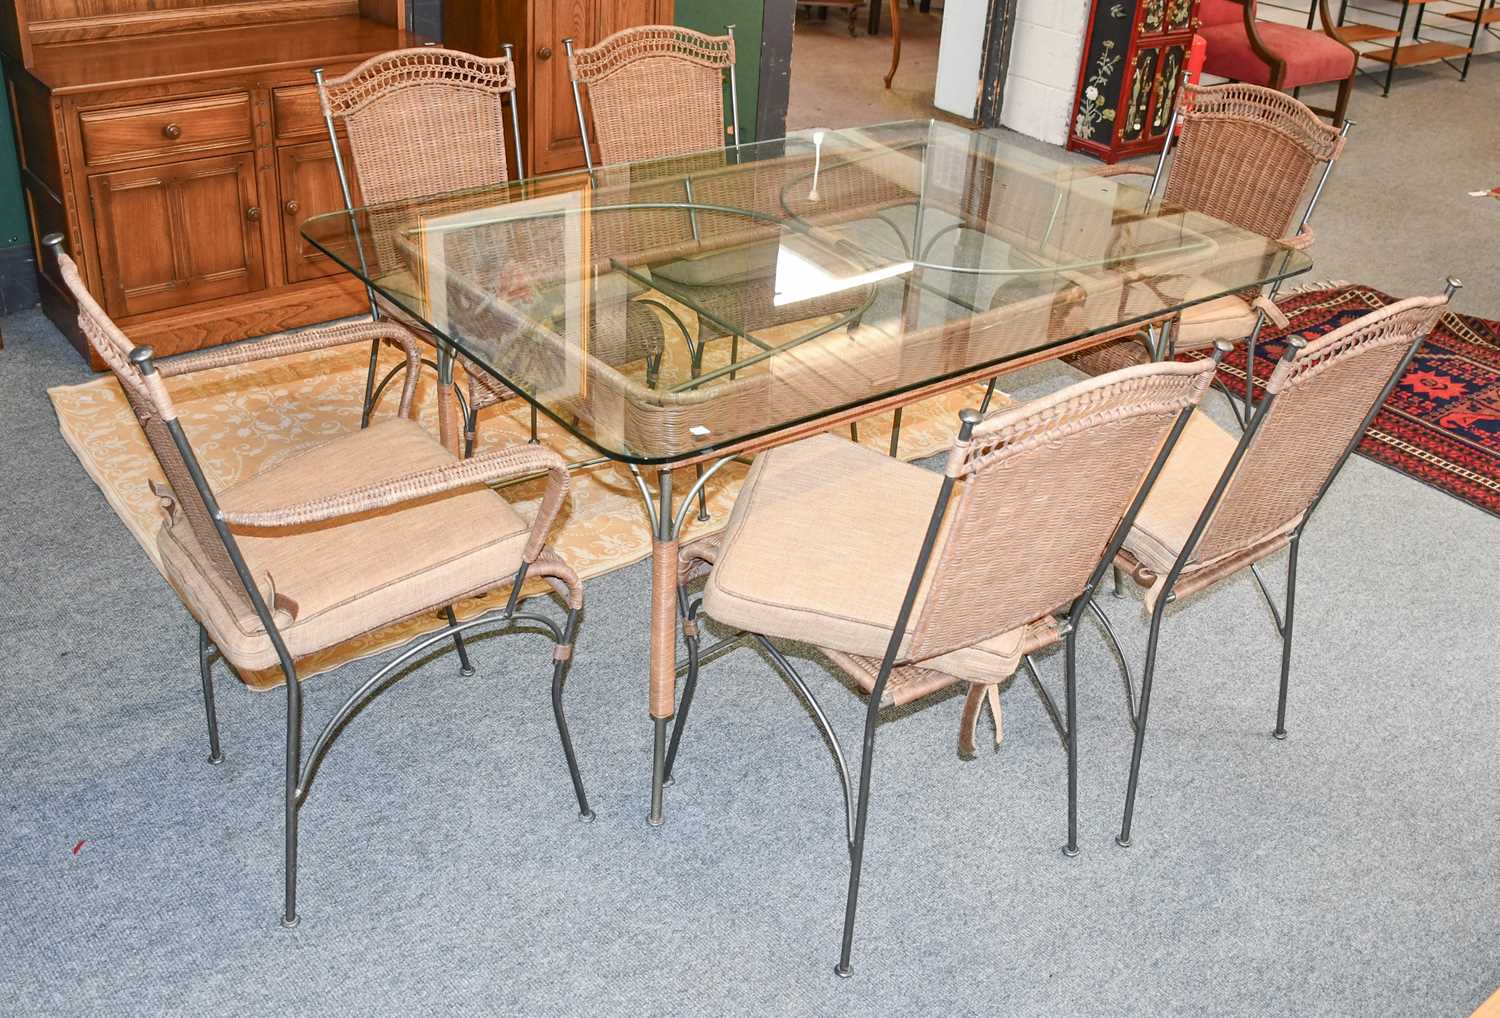 A Metal and Wicker Glass Topped Dining Table and Six Matching Chairs, including two carvers (7) - Image 2 of 2